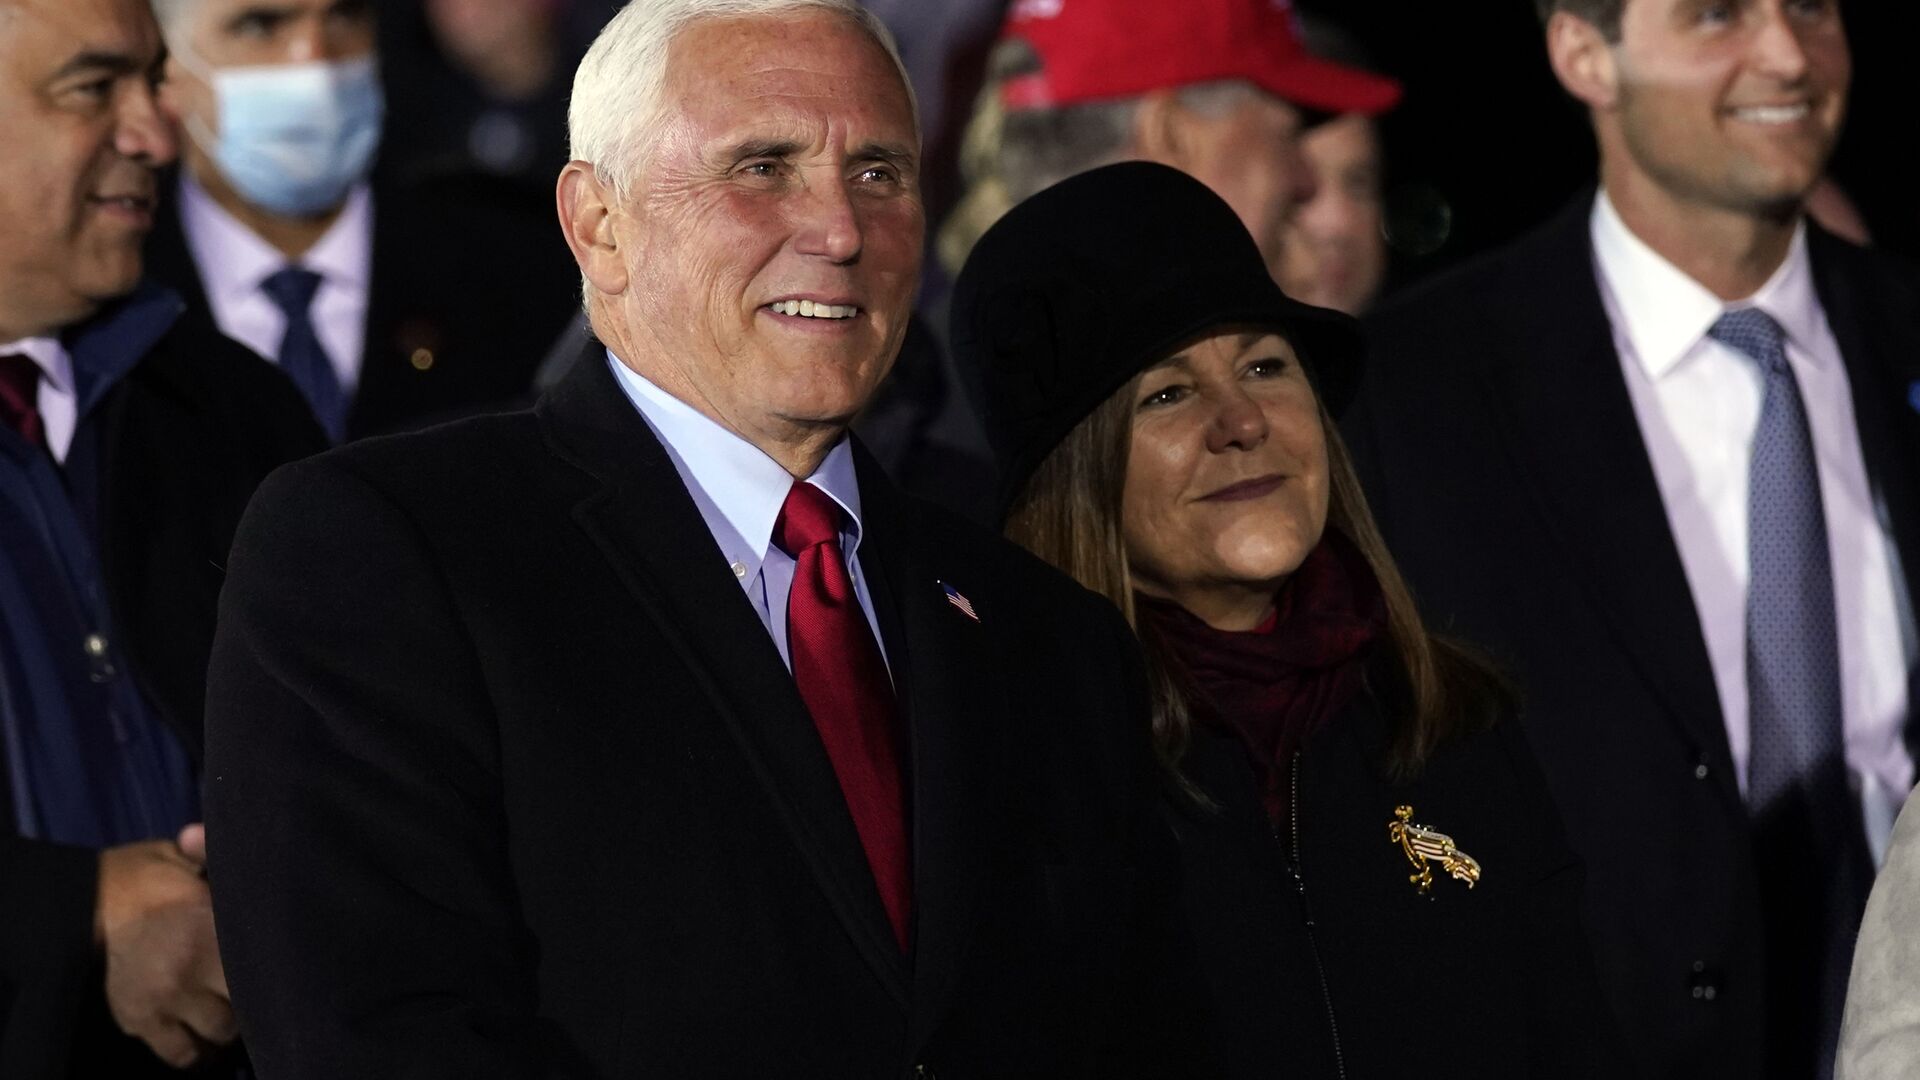 Vice President Mike Pence and his wife Karen listen as President Donald Trump speaks during a campaign rally at Gerald R. Ford International Airport, early Tuesday, Nov. 3, 2020, in Grand Rapids, Mich. - Sputnik International, 1920, 09.09.2021